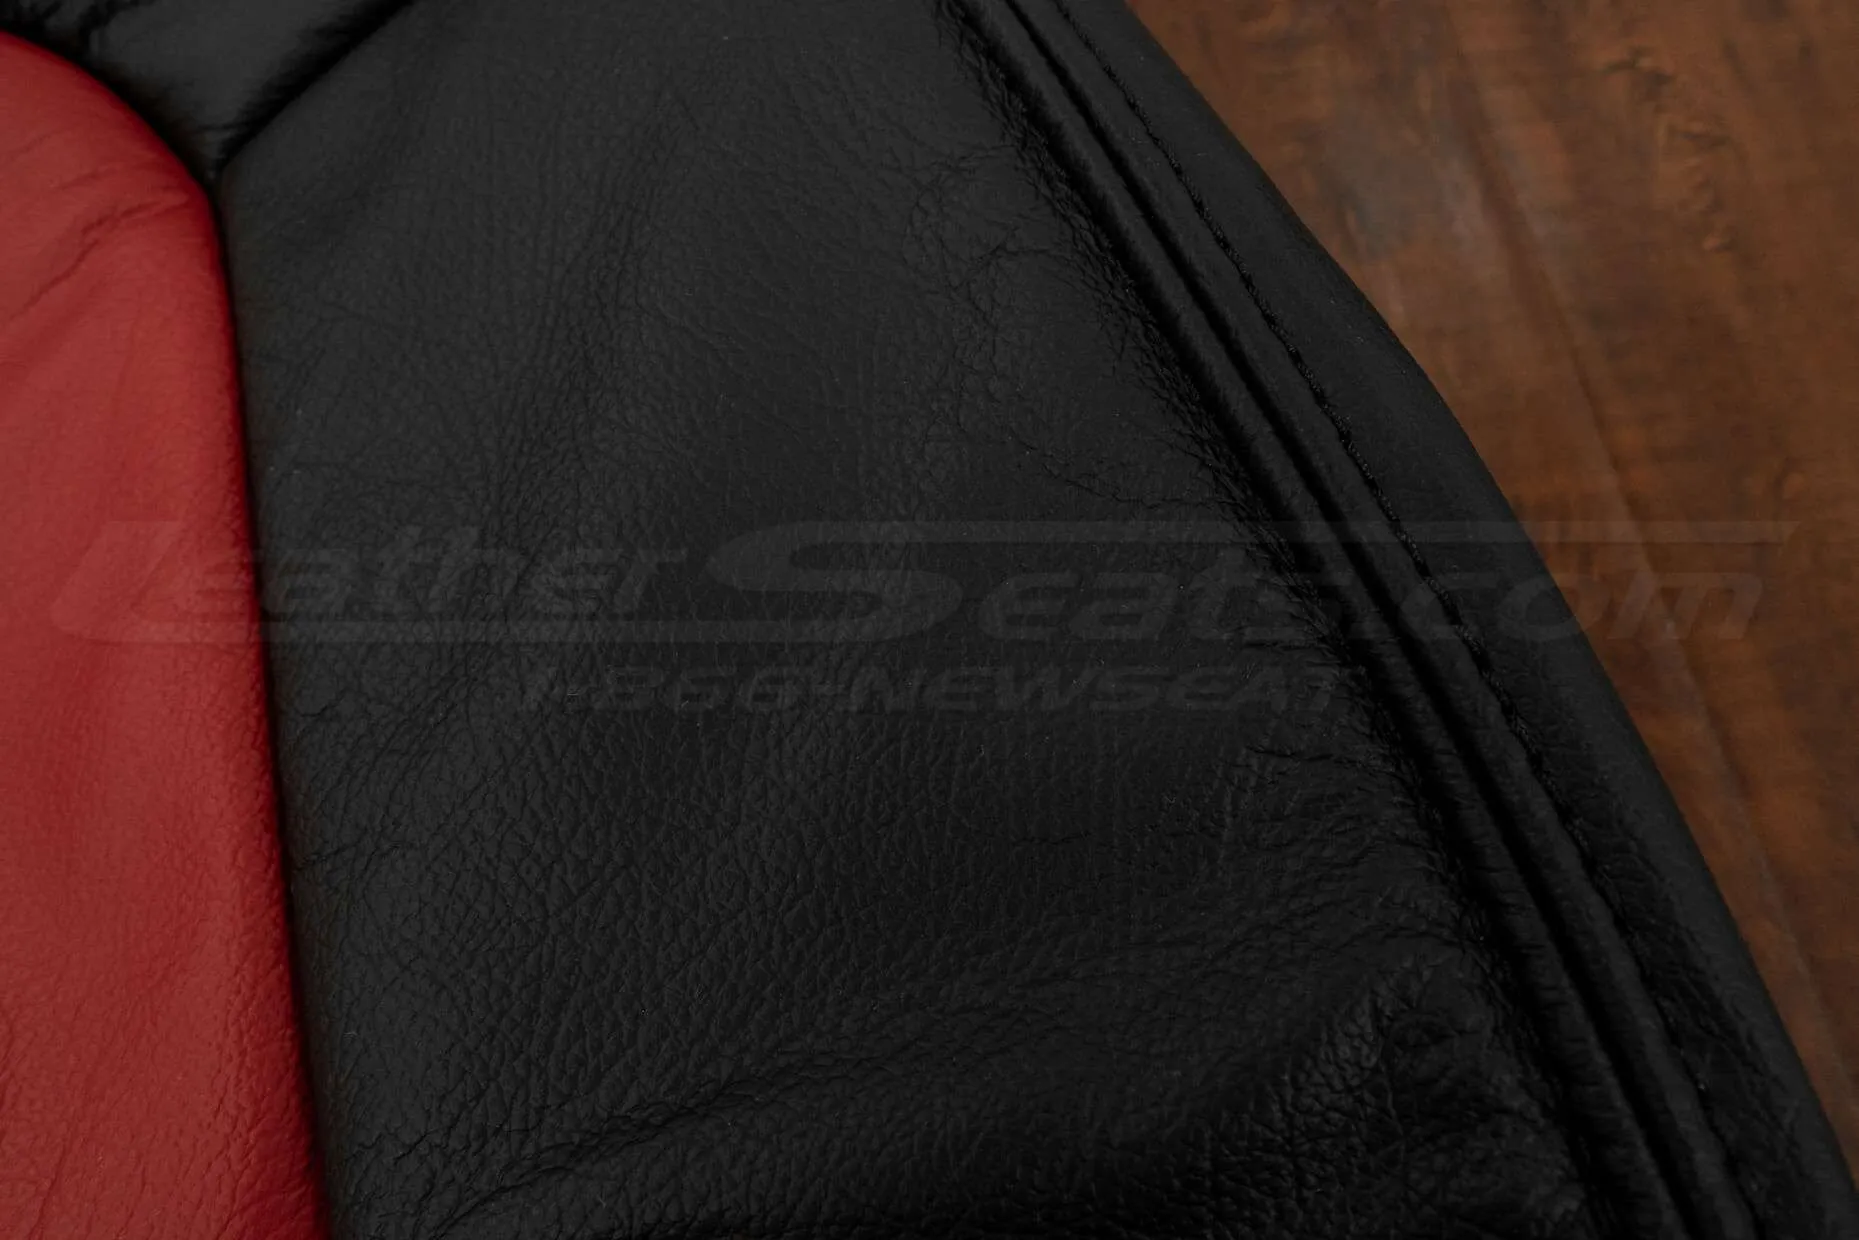 Pontiac G8 Leather Kit - Black & Red - Side double-stitching